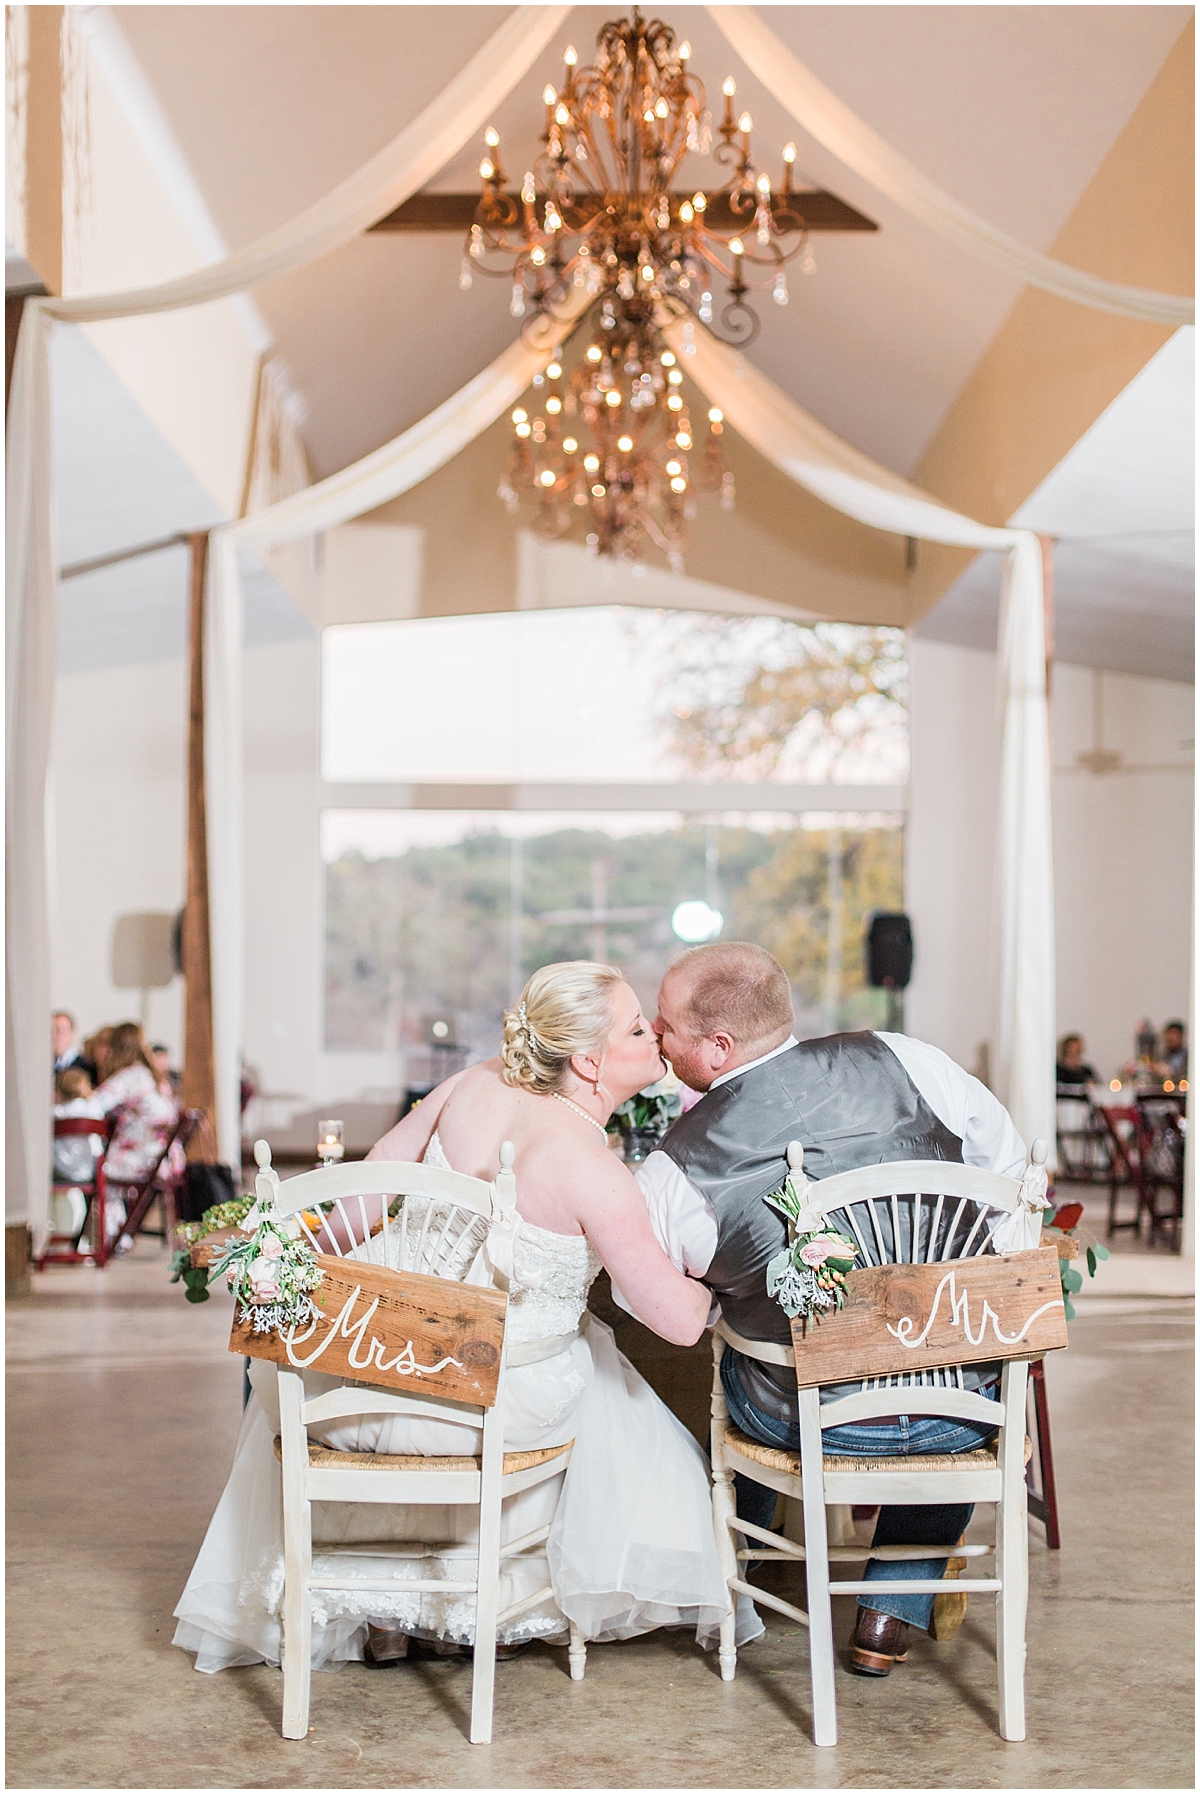 a-slate-blue-and-grey-winter-wedding-at-cw-hill-country-ranch-in-boerne-texas-by-allison-jeffers-wedding-photography_0102